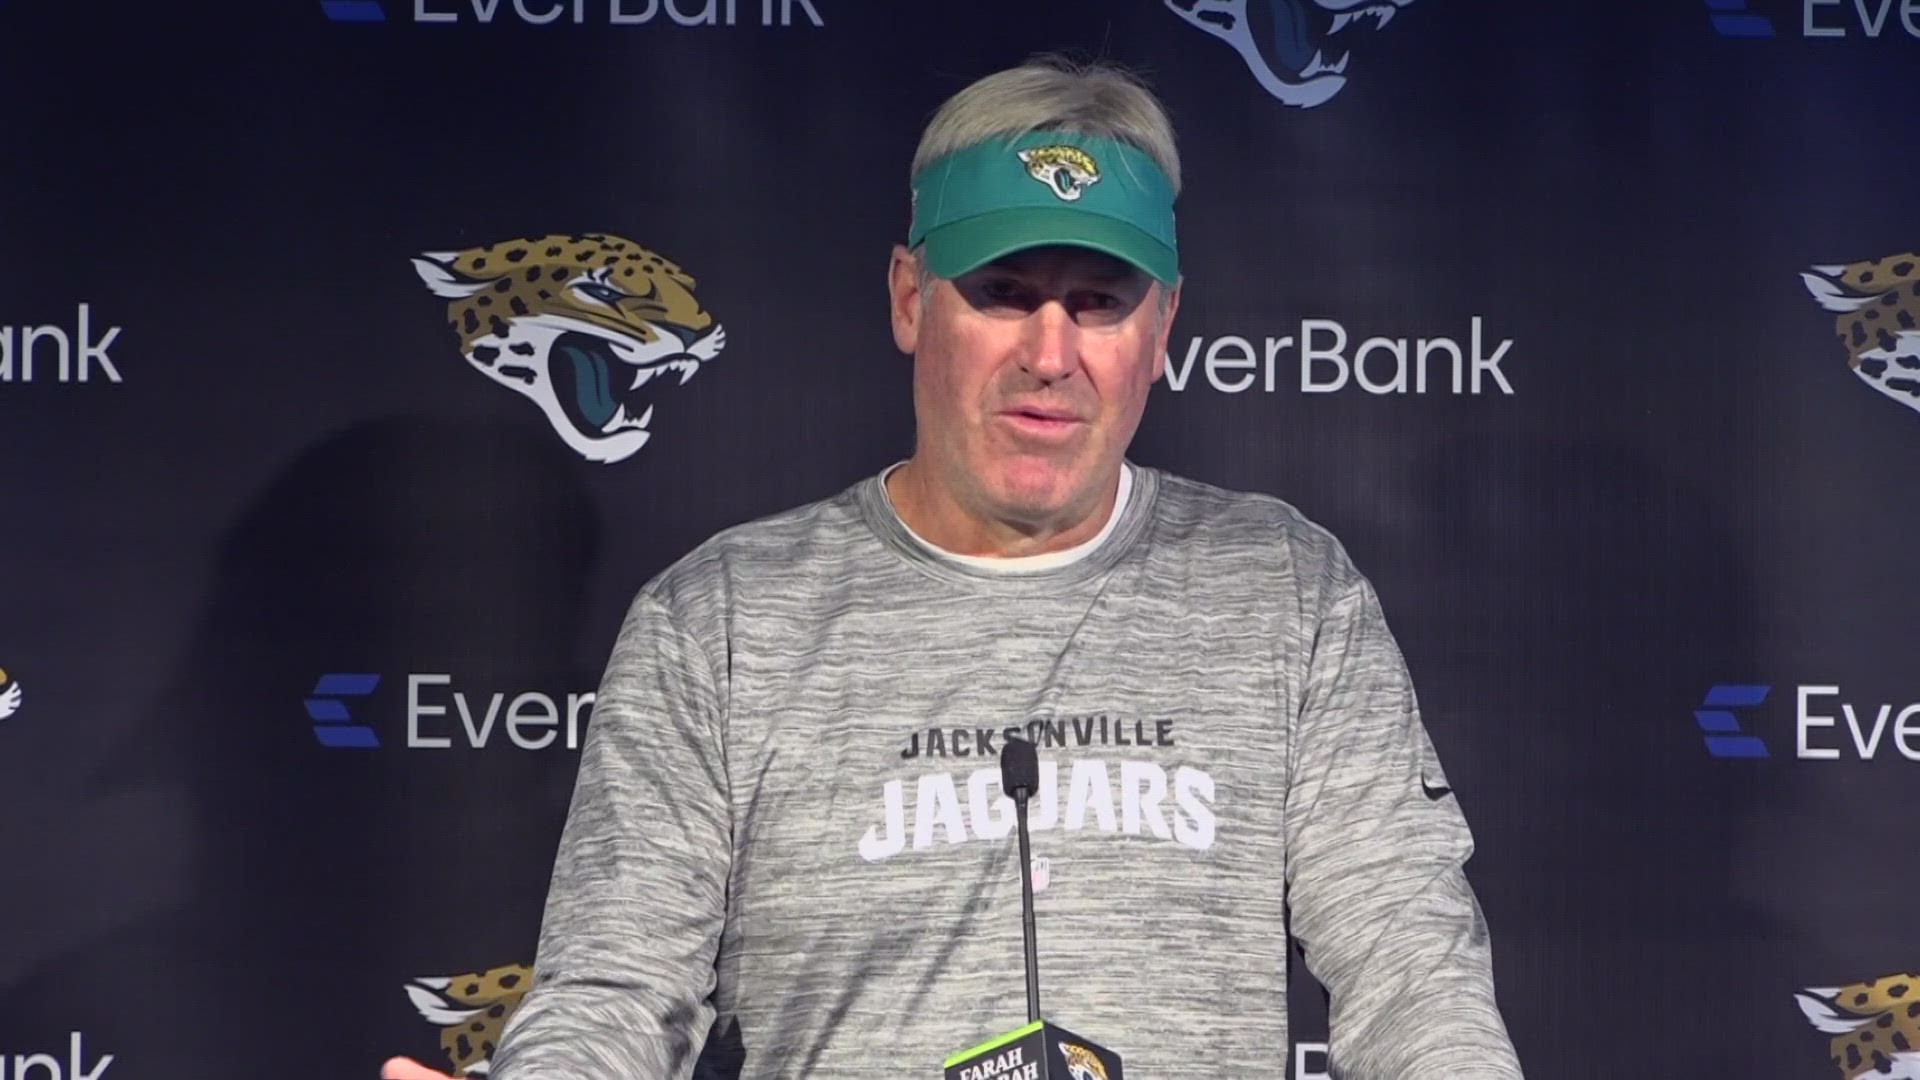 Here's what the head coach had to say prior to taking on the Carolina Panthers (2-13)